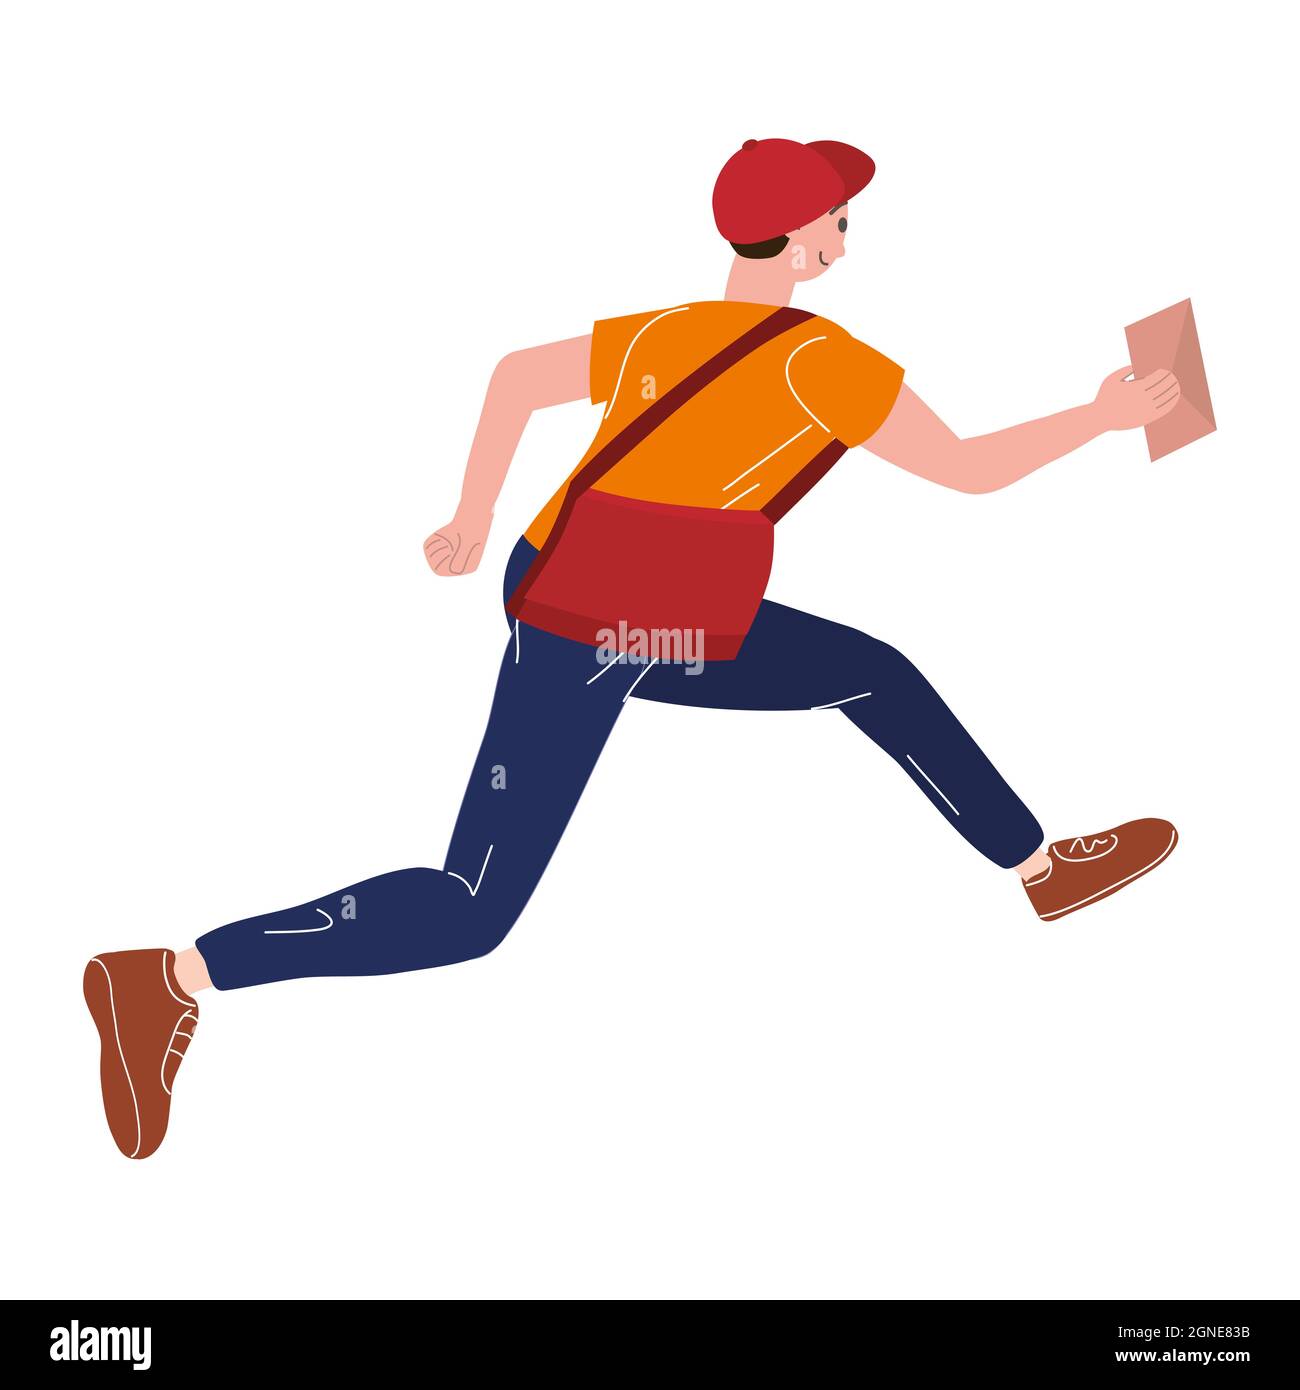 Postman running with bag delivering letter in envelope. Mailman in cap carrying mail, delivery service. Vector illustration Stock Vector